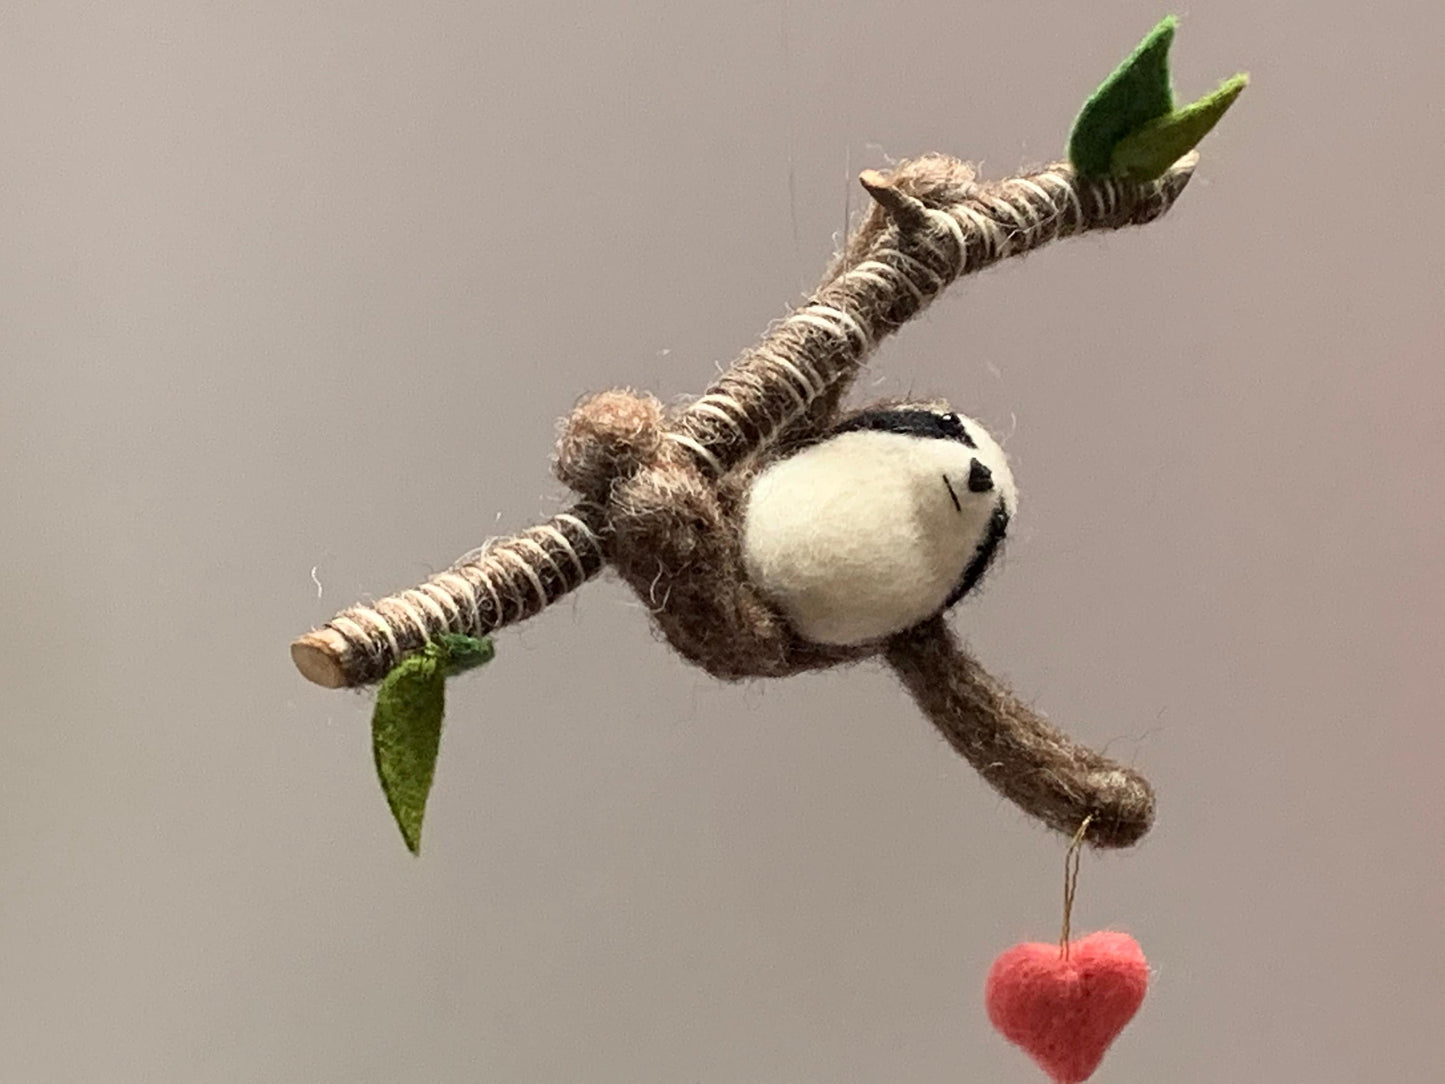 Sloth Ornament, Needle Felted Hanging Sloth Christmas Tree Ornament or Mobile